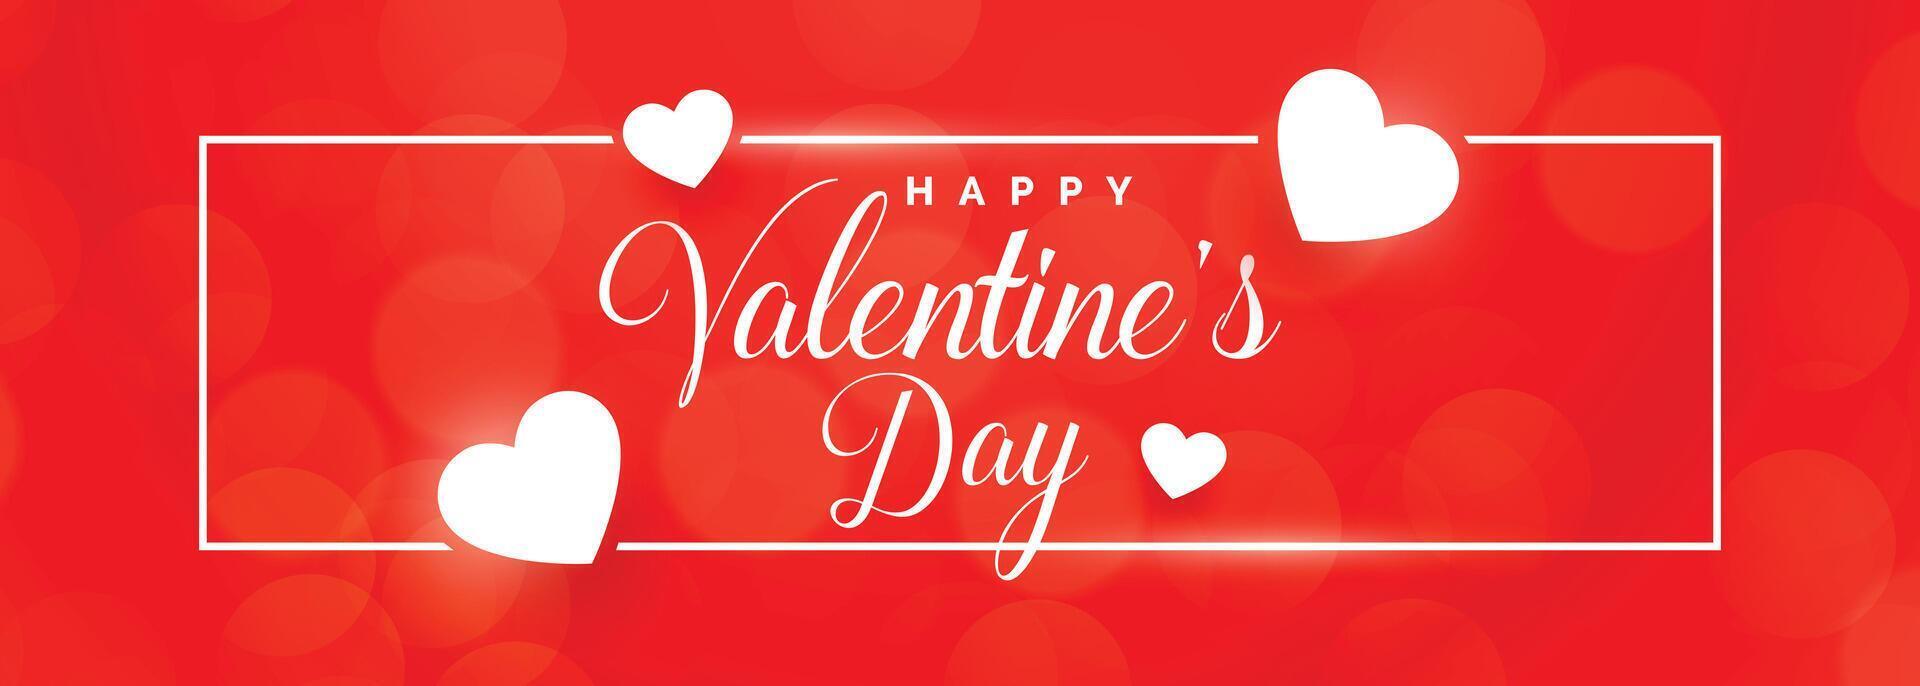 beautiful red hearts valentines day banner design vector